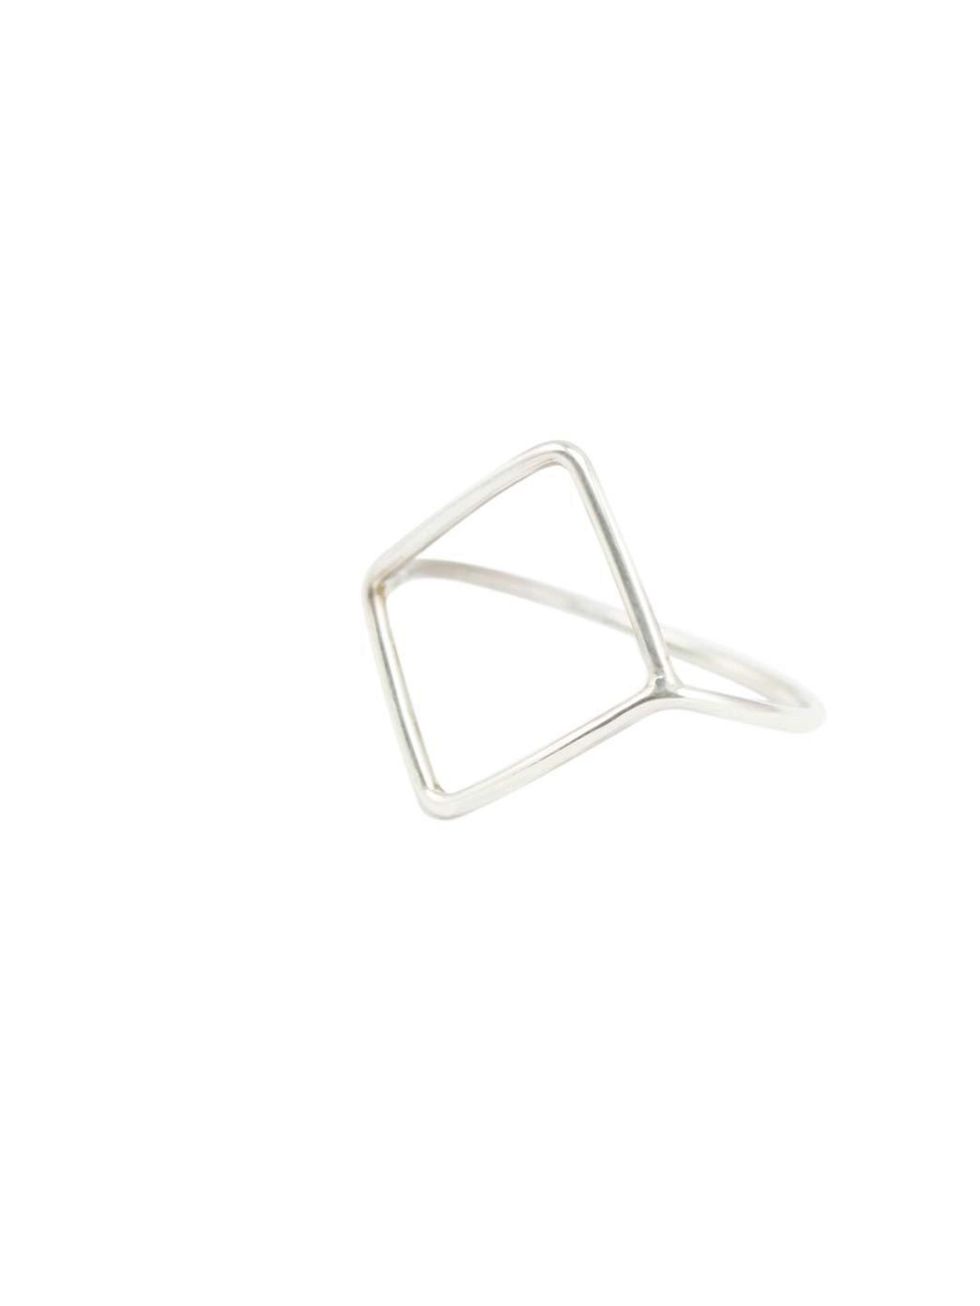 <p>This simple ring is understated enough to wear with the eclectic mix of heirloom rings that I've inherited from my family over the years. </p><p>- Phoebe Sing, Designer</p><p><a href="http://www.regalrose.co.uk/product/aria-tattoo-frame-silver-ring">Re